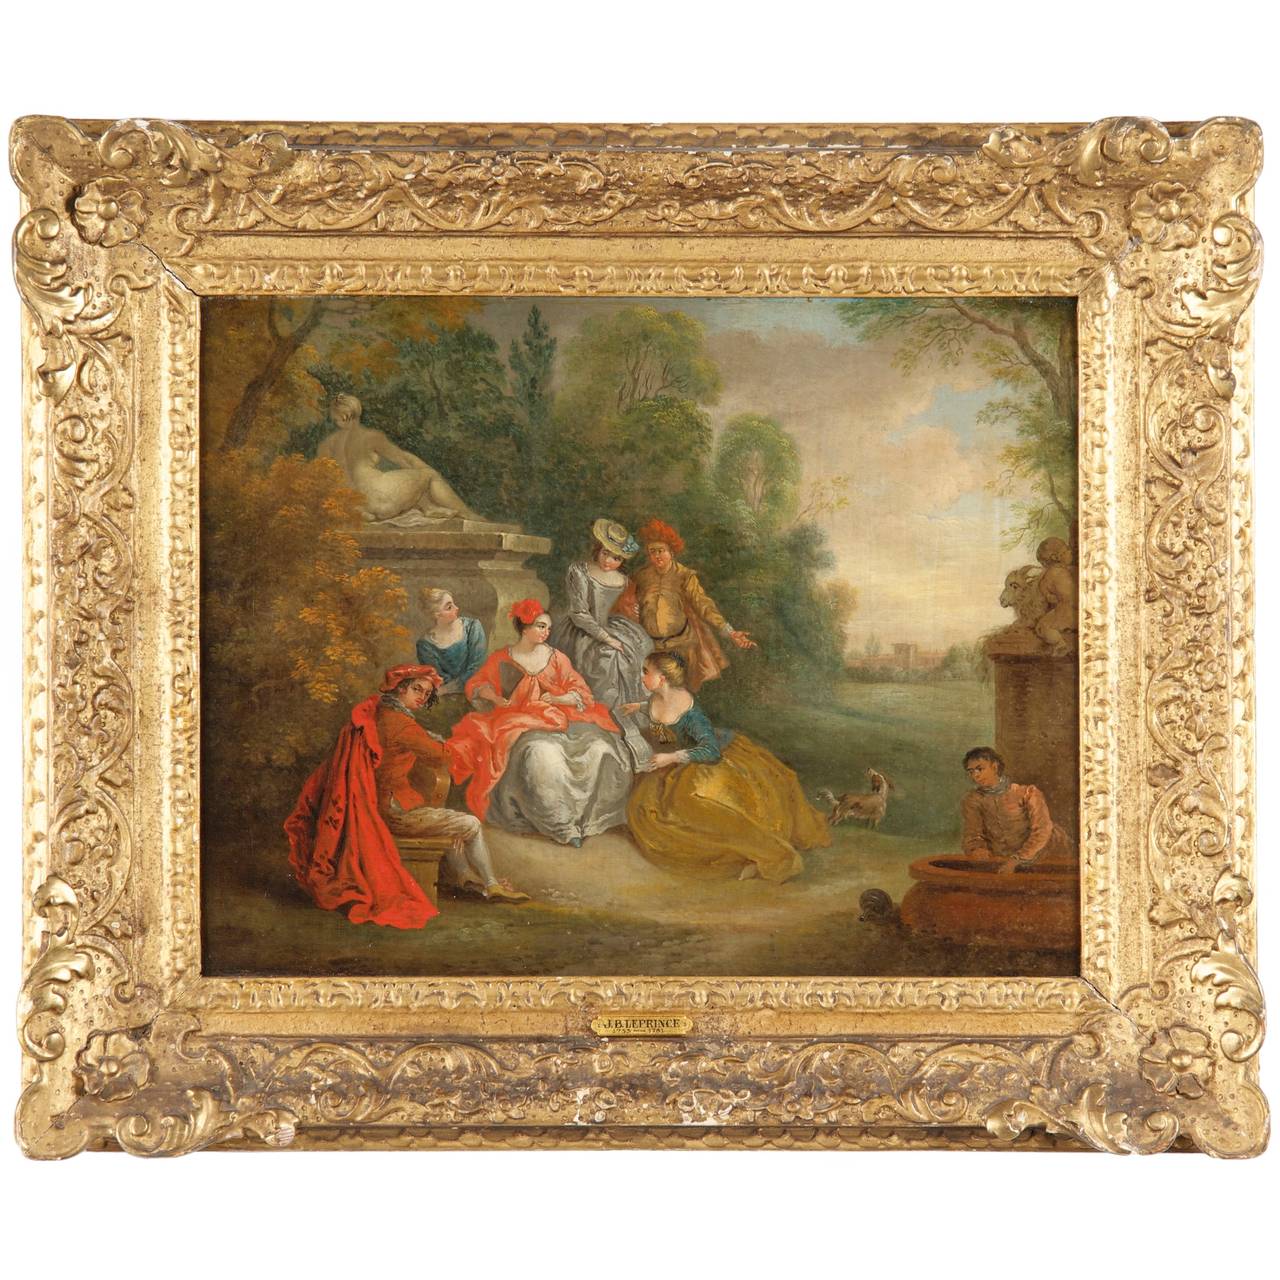 This gorgeous pair of French School antique courting scene paintings capture the very essence of the Rococo period, not only in the context of dress and scenery but also in terms of it's excessive spirit. Ladies and gentlemen lounge in a plush